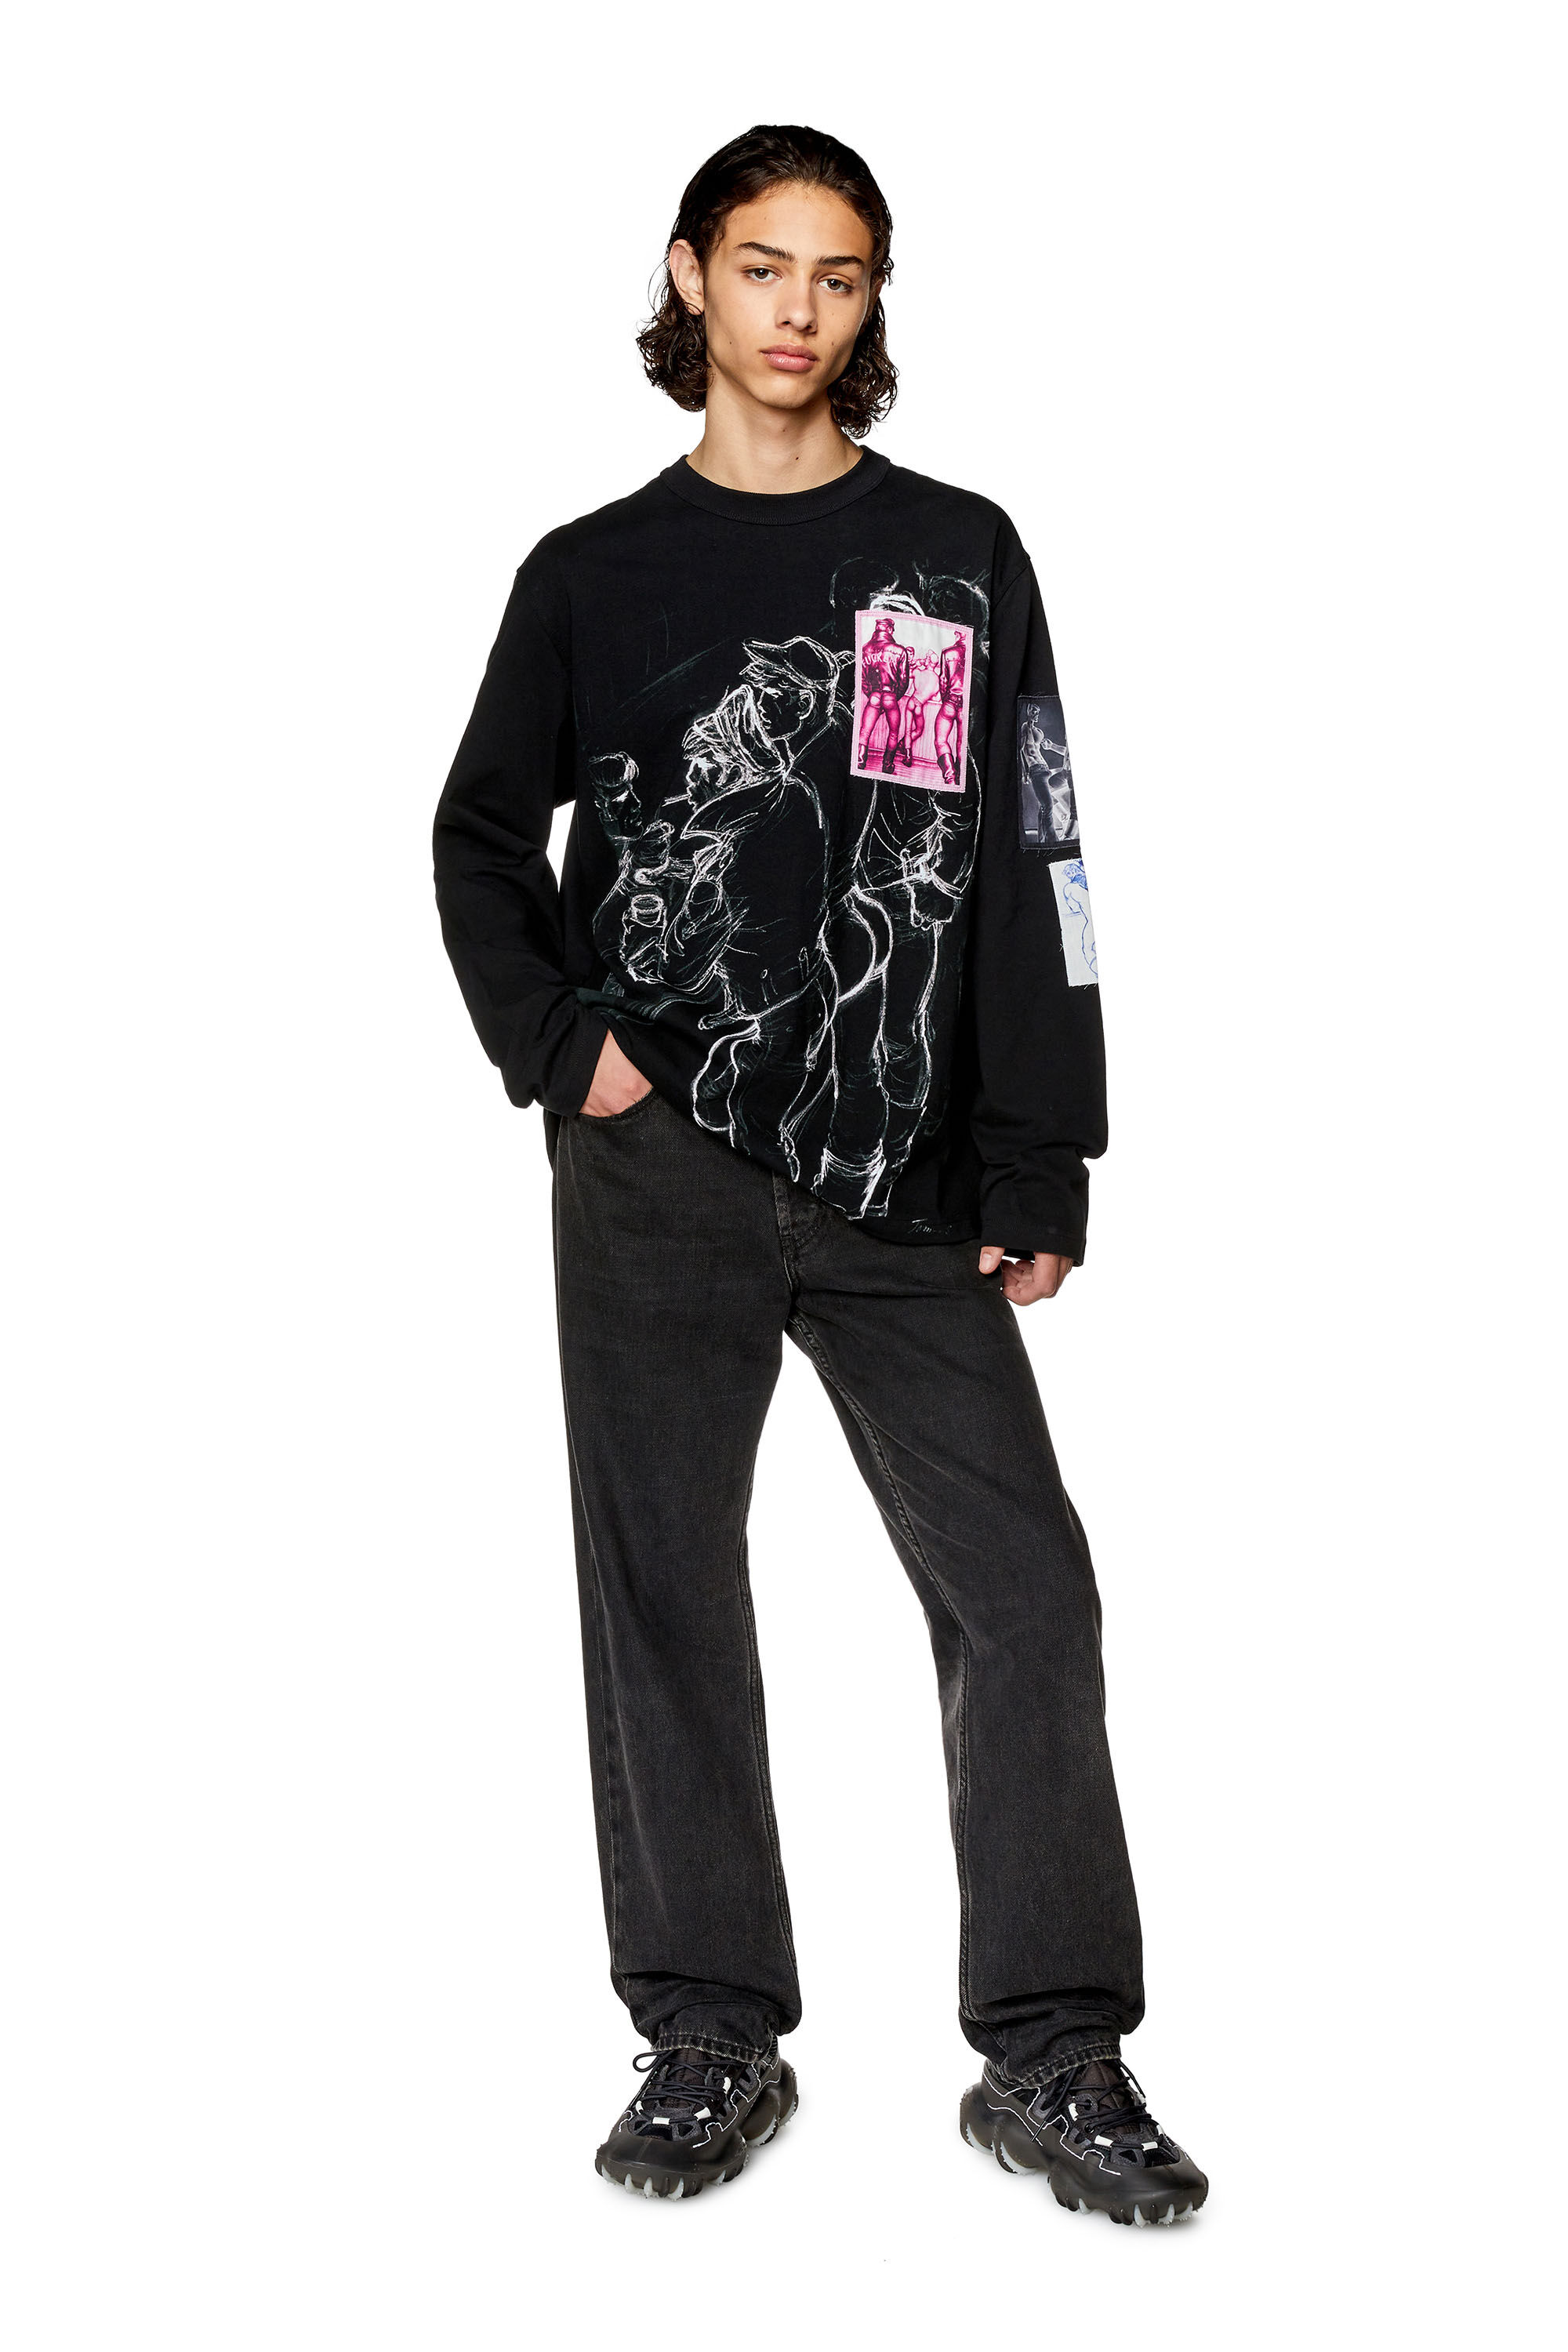 Women's Long-sleeve T-shirt with prints and patches | PR-T-CRANE